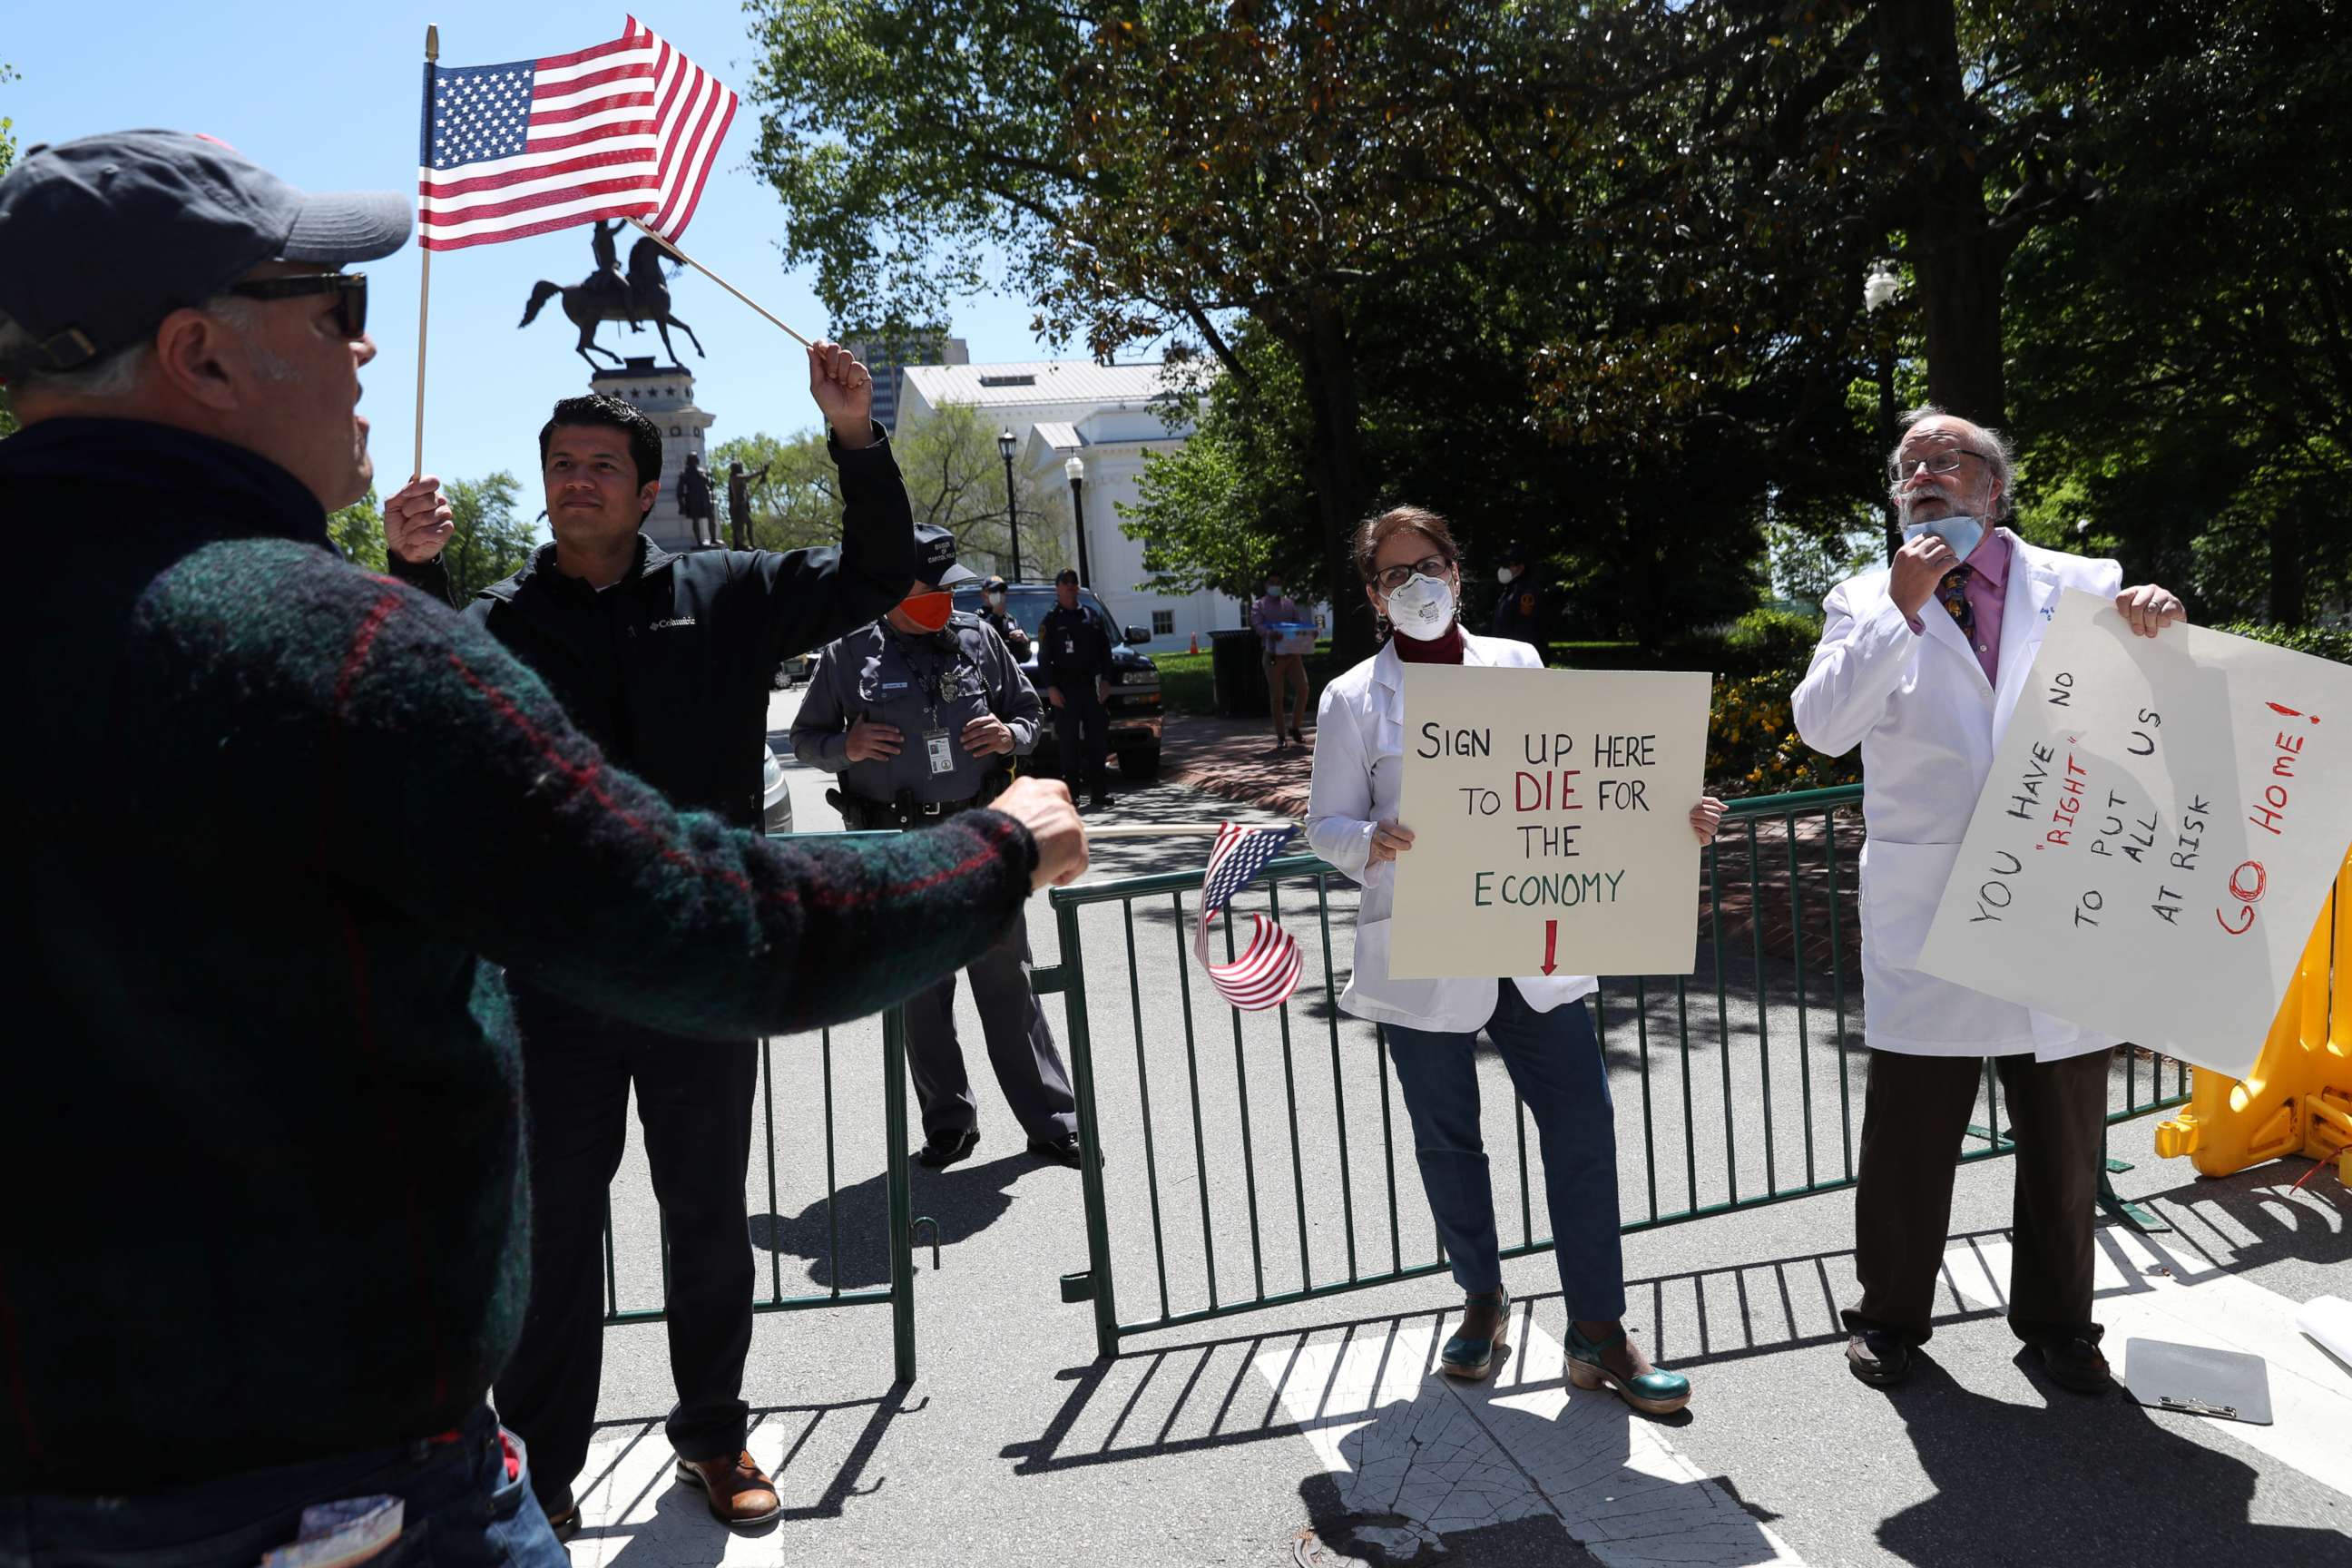 PHOTO: A demonstrator protesting against lockdown to limit the spread of coronavirus argues with counter-demonstrators Dr. Erich Bruhn and former nurse Kristin Bruhn, during a rally calling for the reopening of the state in Richmond, Va., April 22, 2020.